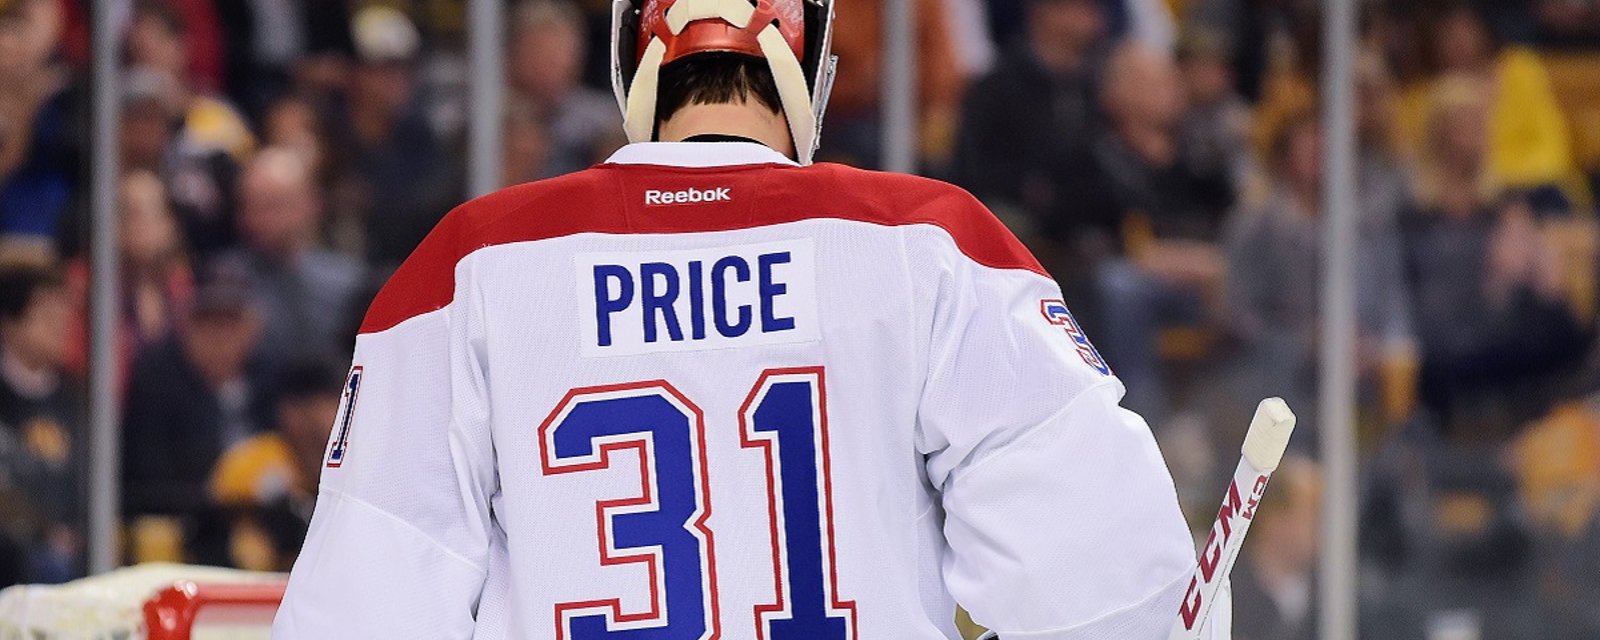 Carey Price has a chance to lead the Canadiens to two records tonight.